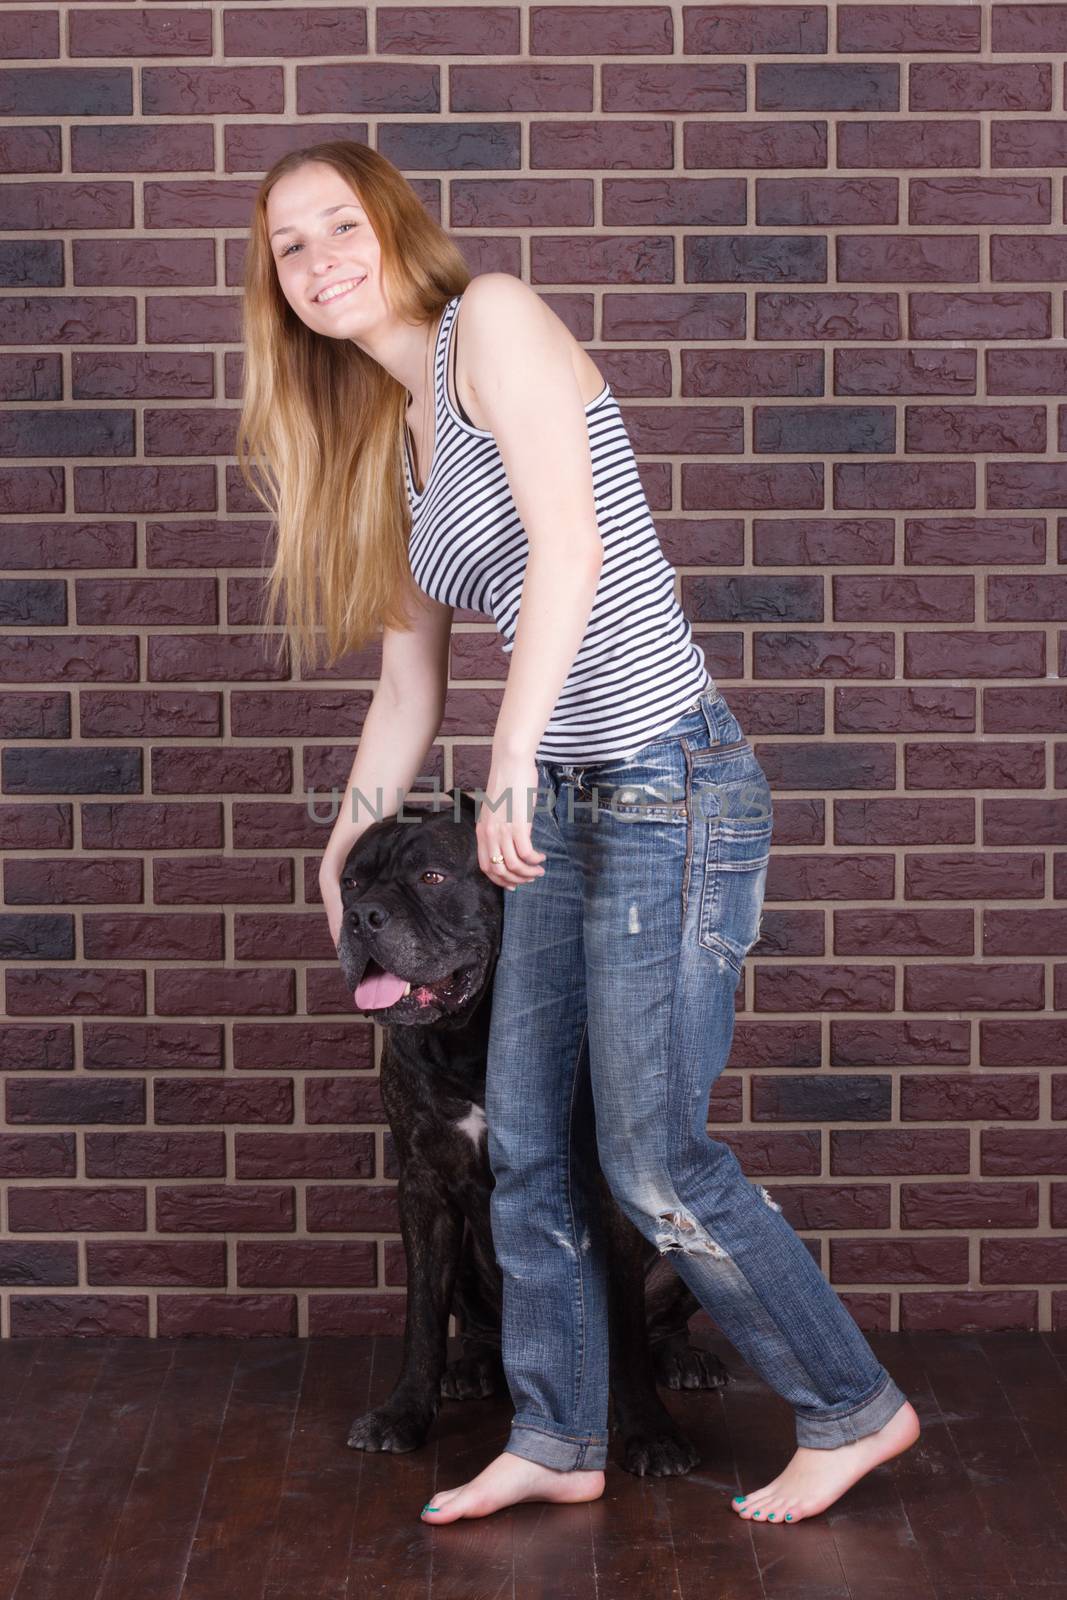 girl in jeans  standing near the wall and hugging a big dog Cane Corso